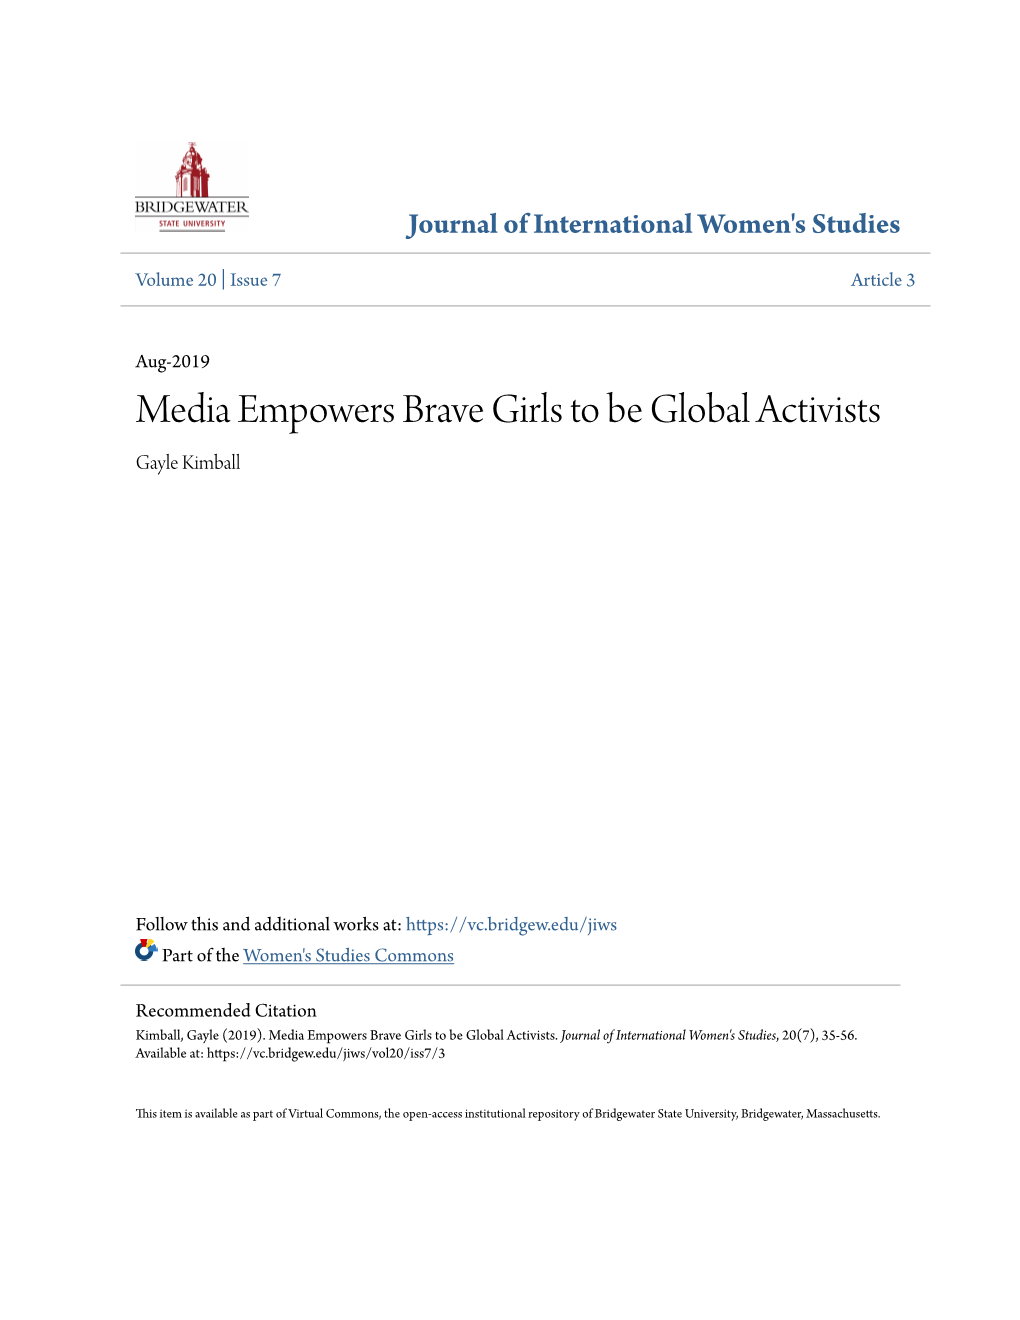 Media Empowers Brave Girls to Be Global Activists Gayle Kimball